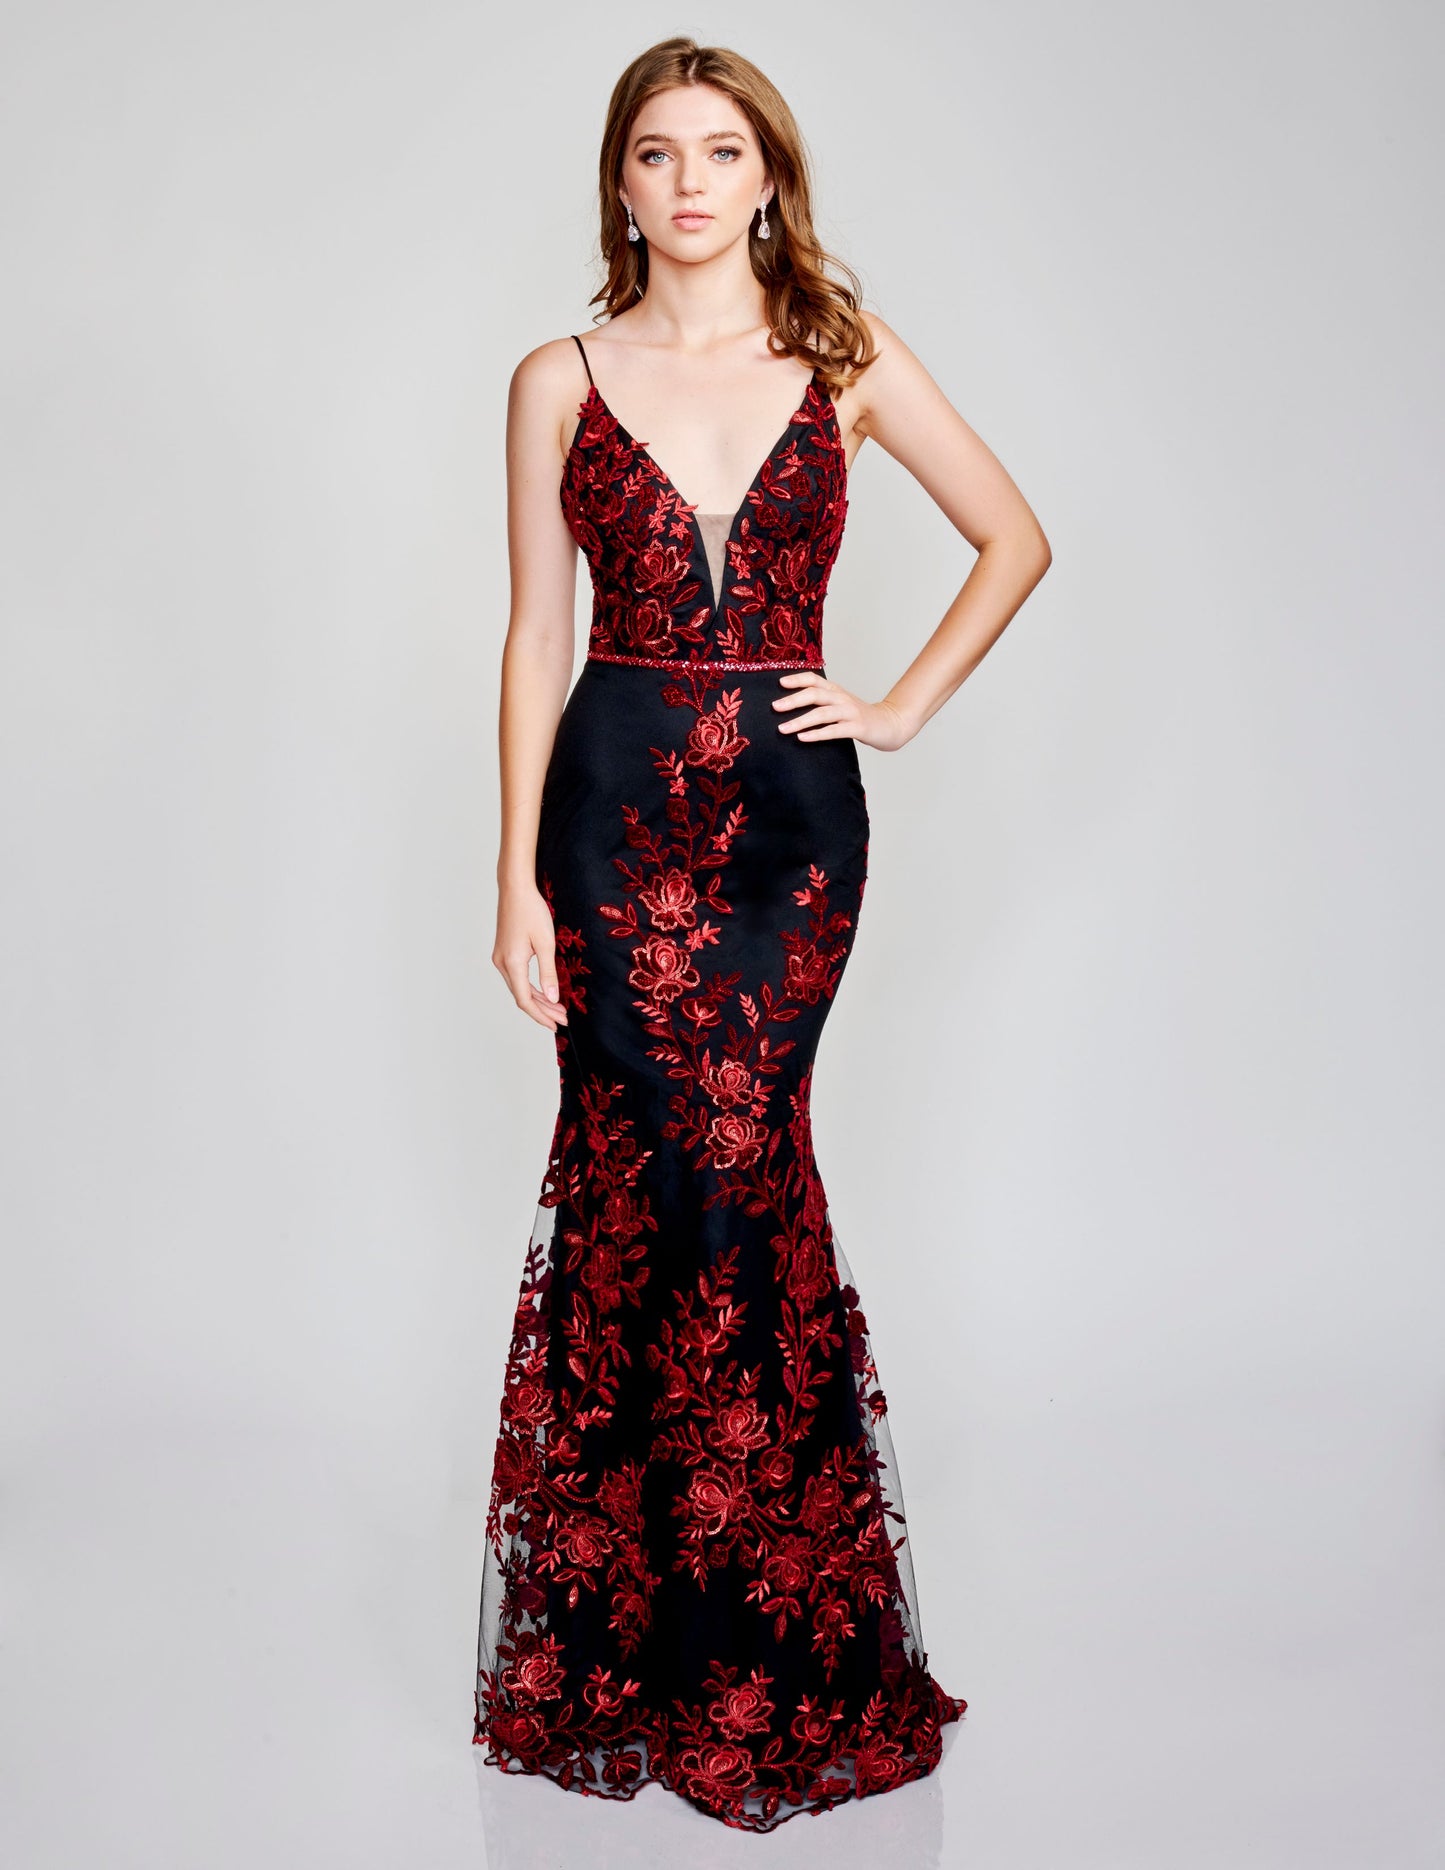 Nina Canacci 2240 Black Burgundy Prom Dress Evening Gown Floral Lace Size 6